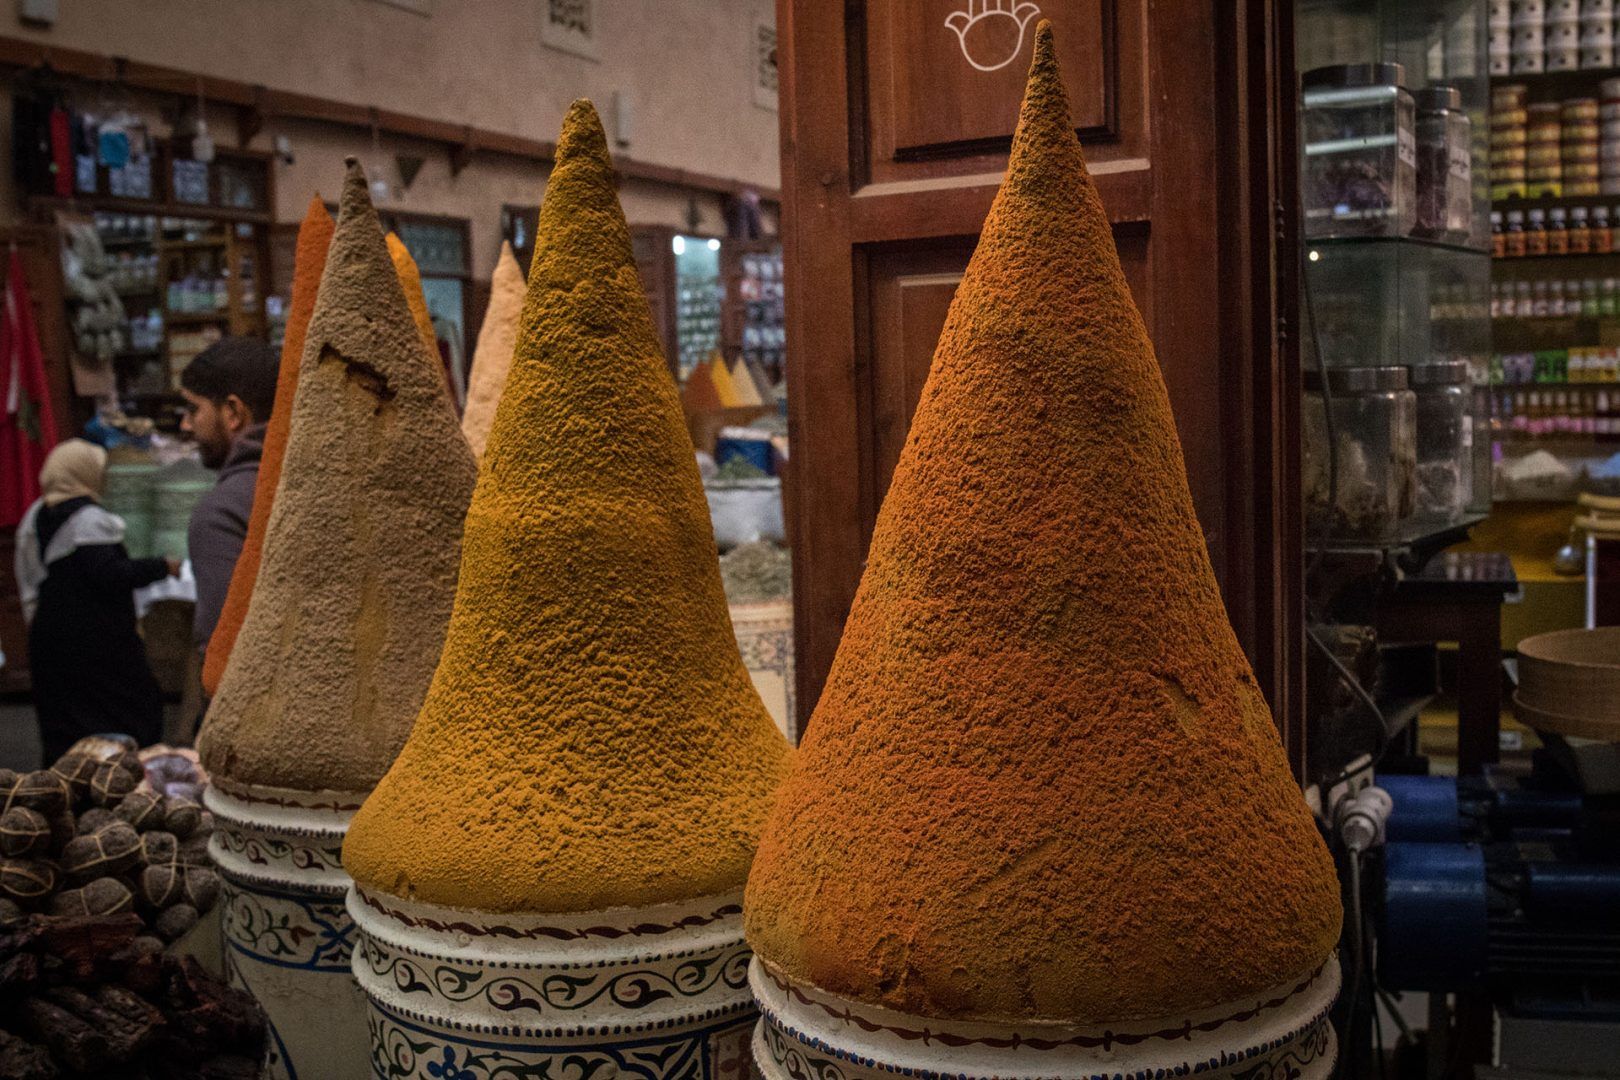 Colourful towers of aromatic spices are a signature feature of Marrakech's souks